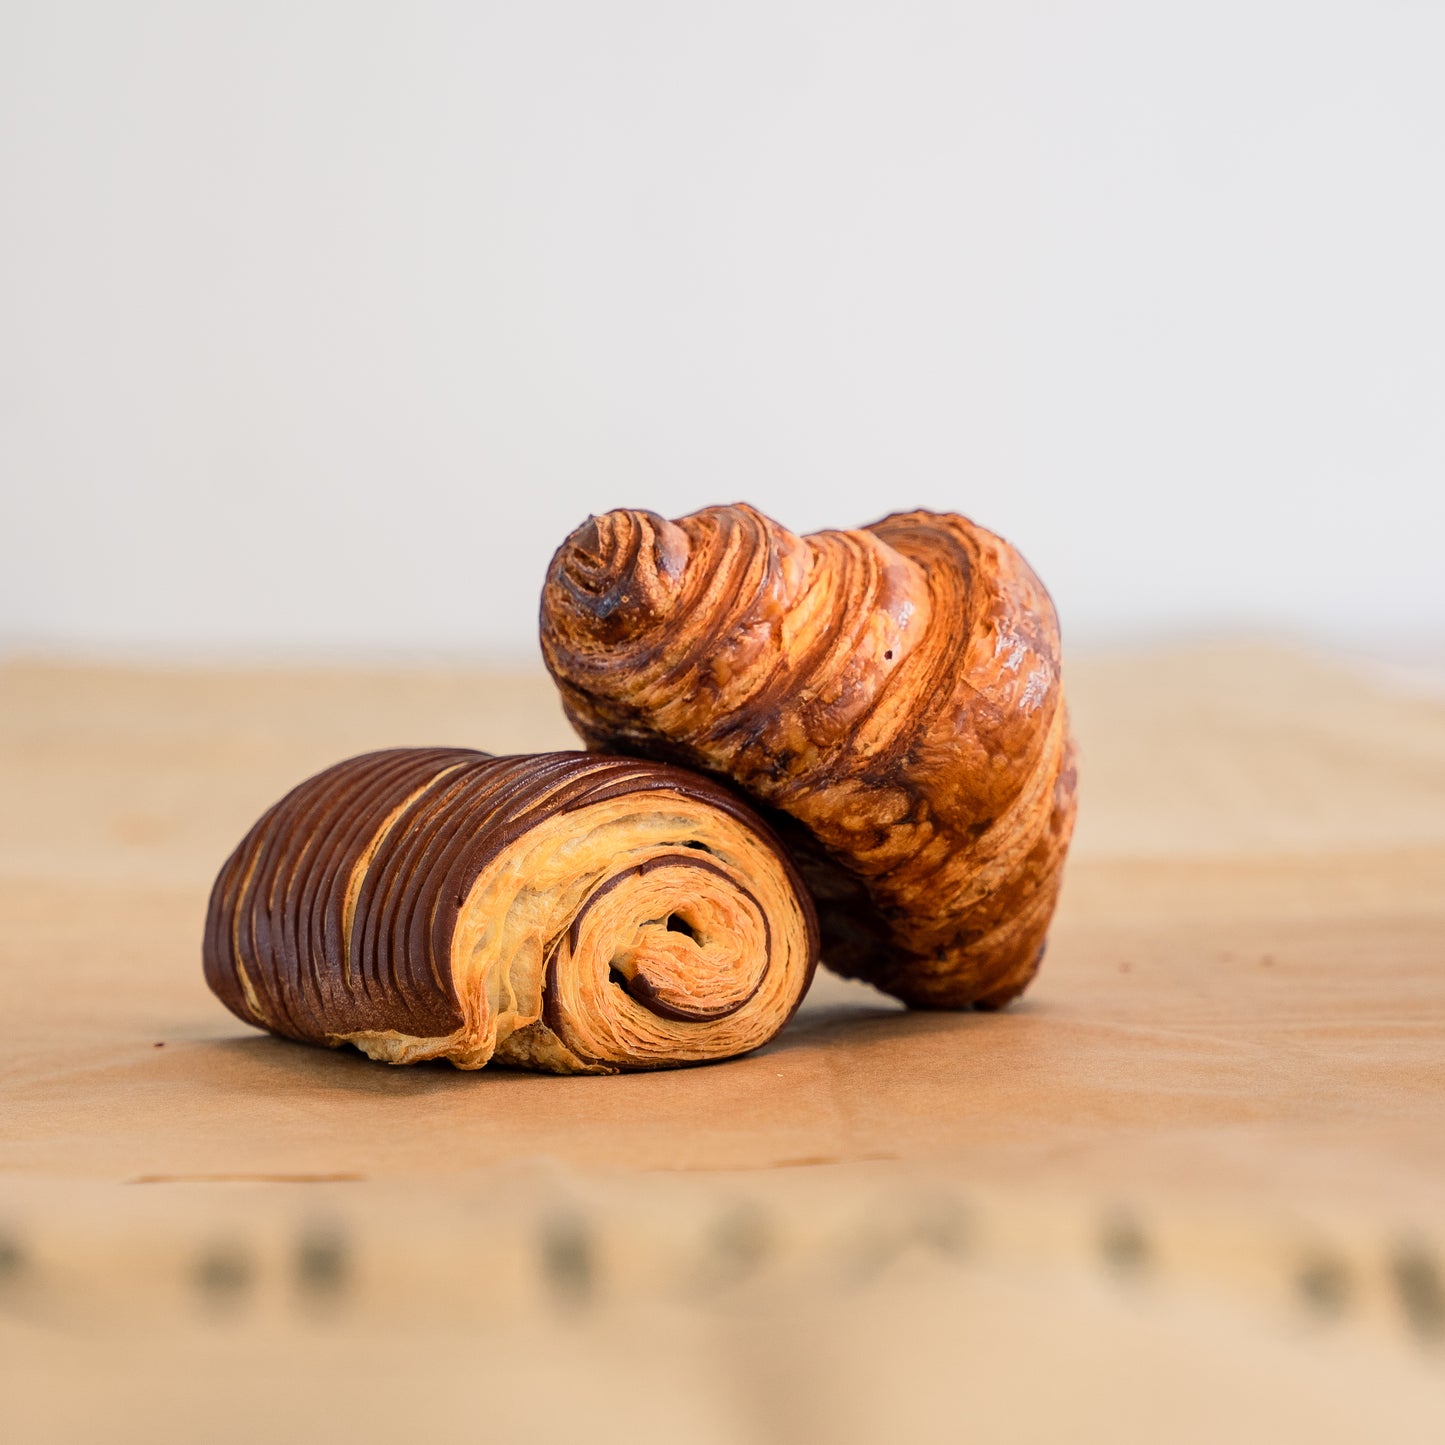 A perfectly baked croissant on top of a beautiful chocolate bread.